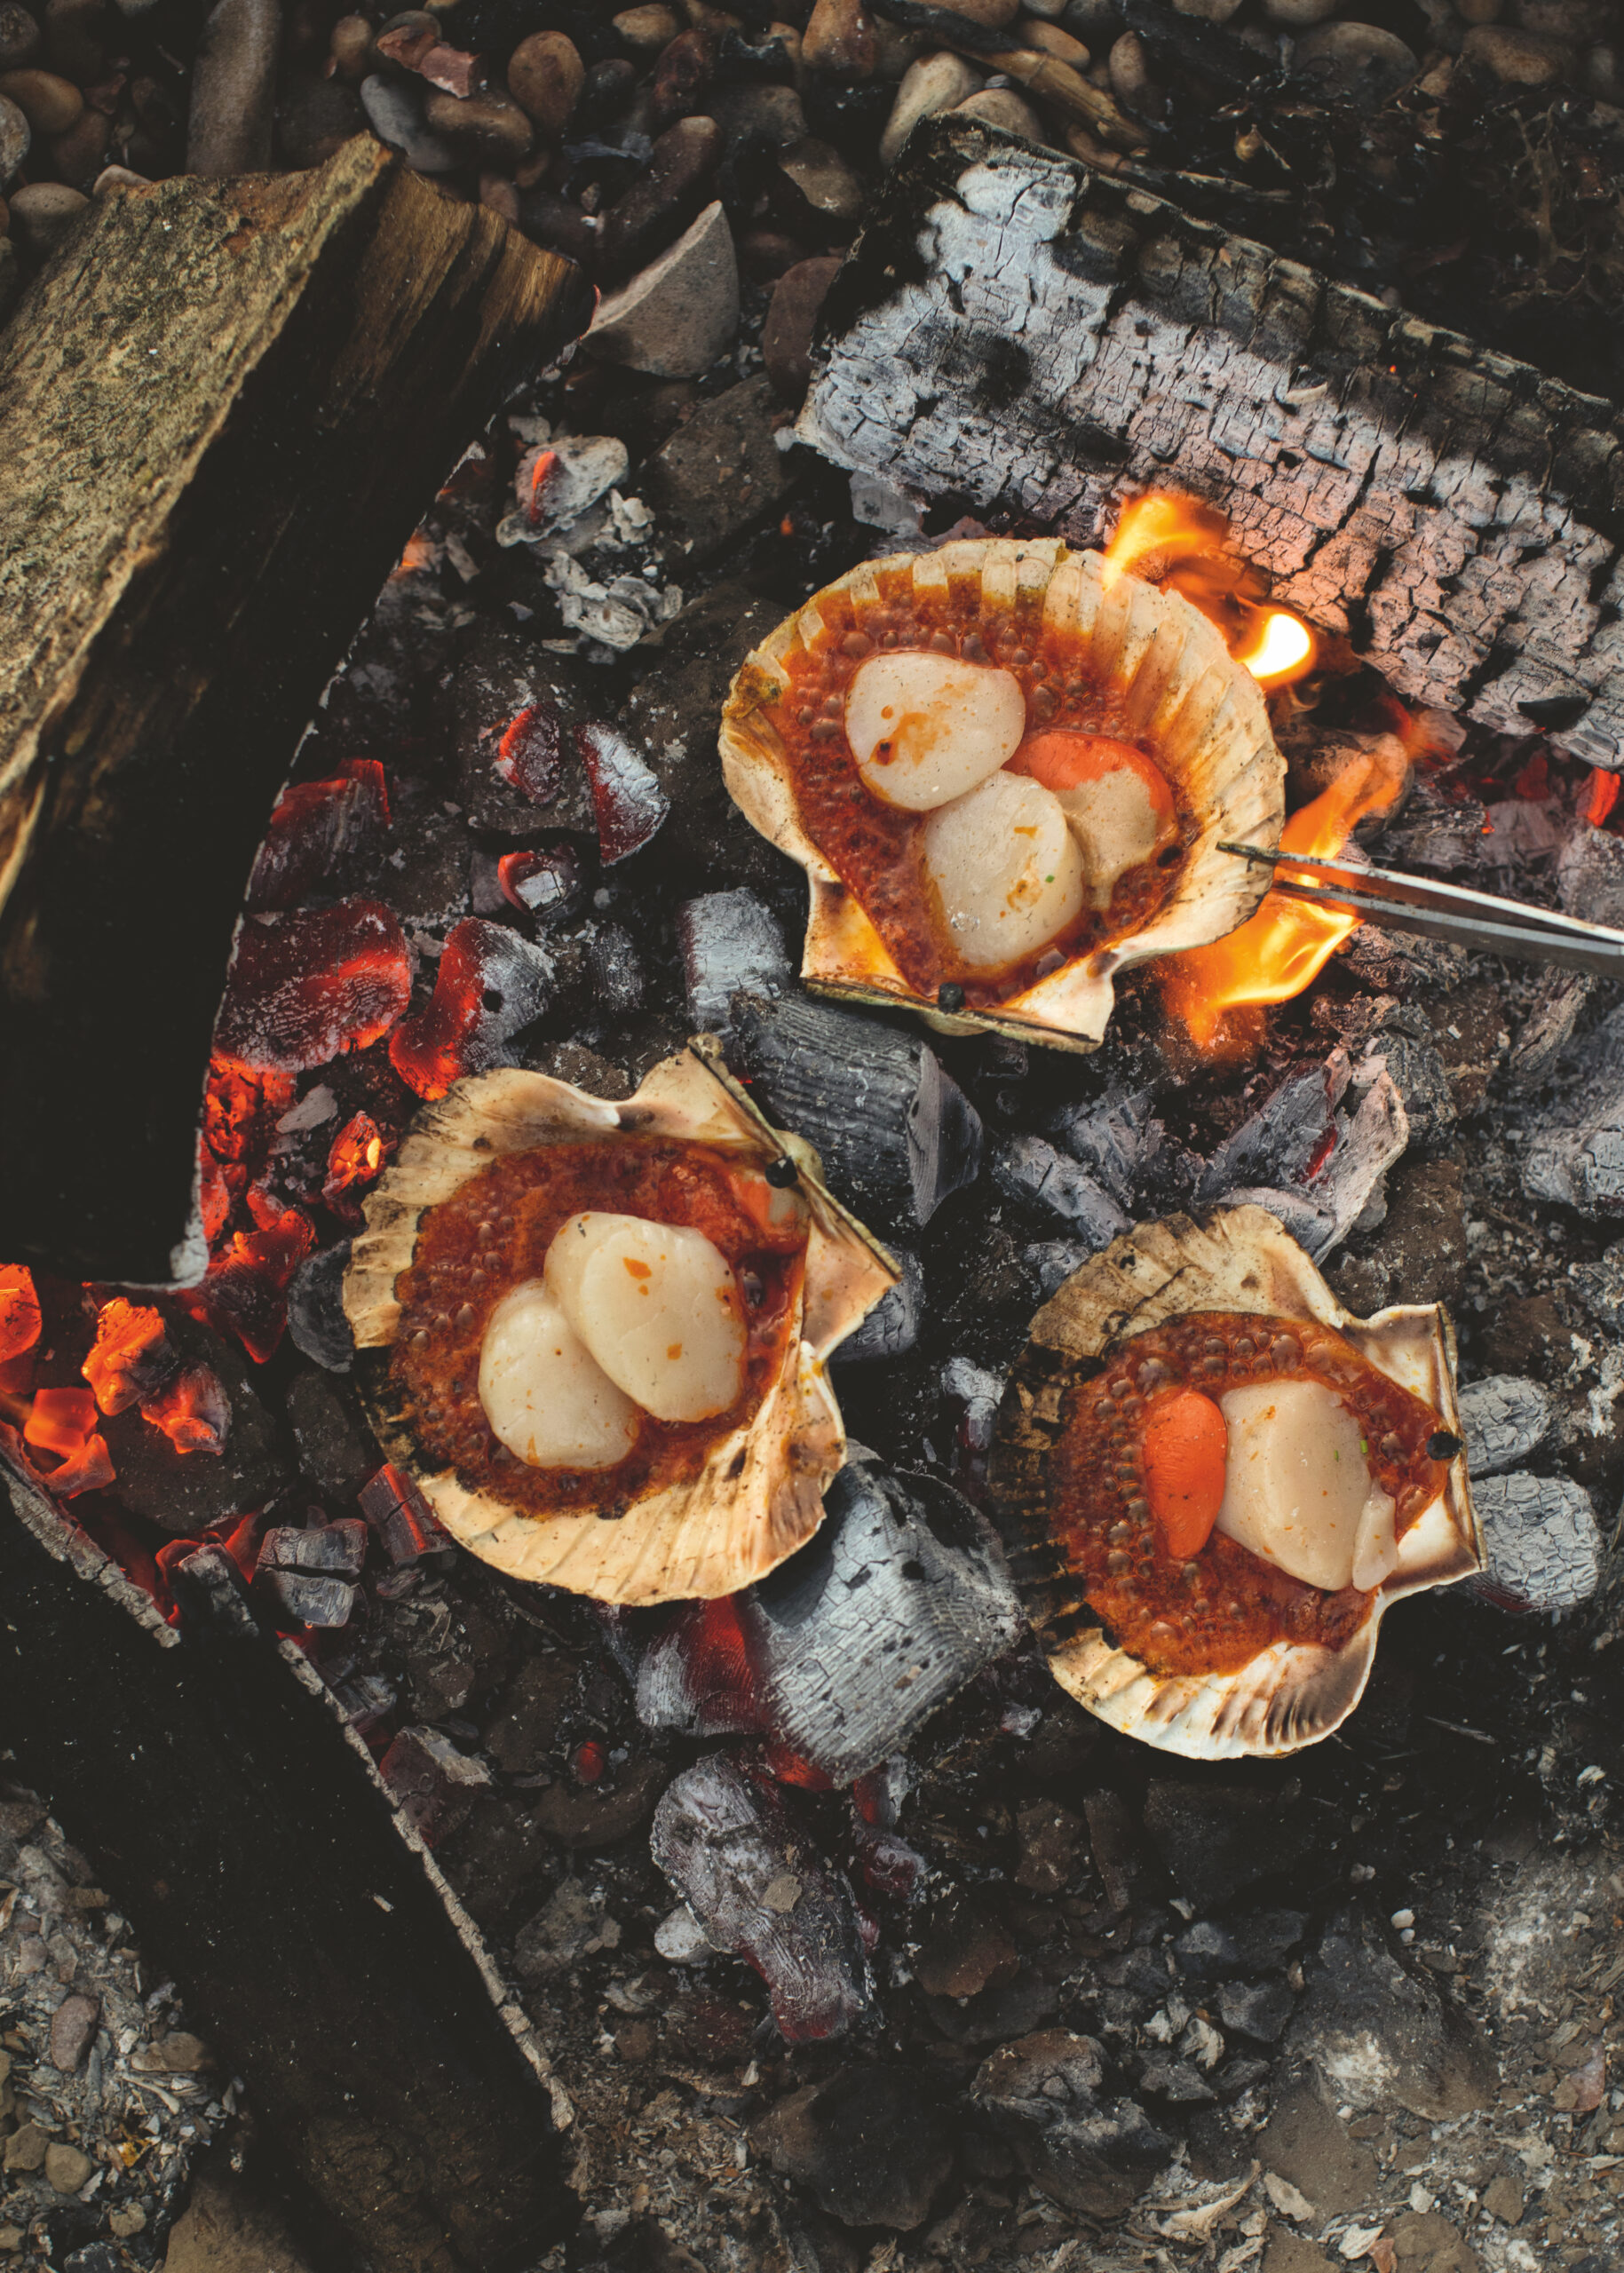 Scallops from The Happy Foodie